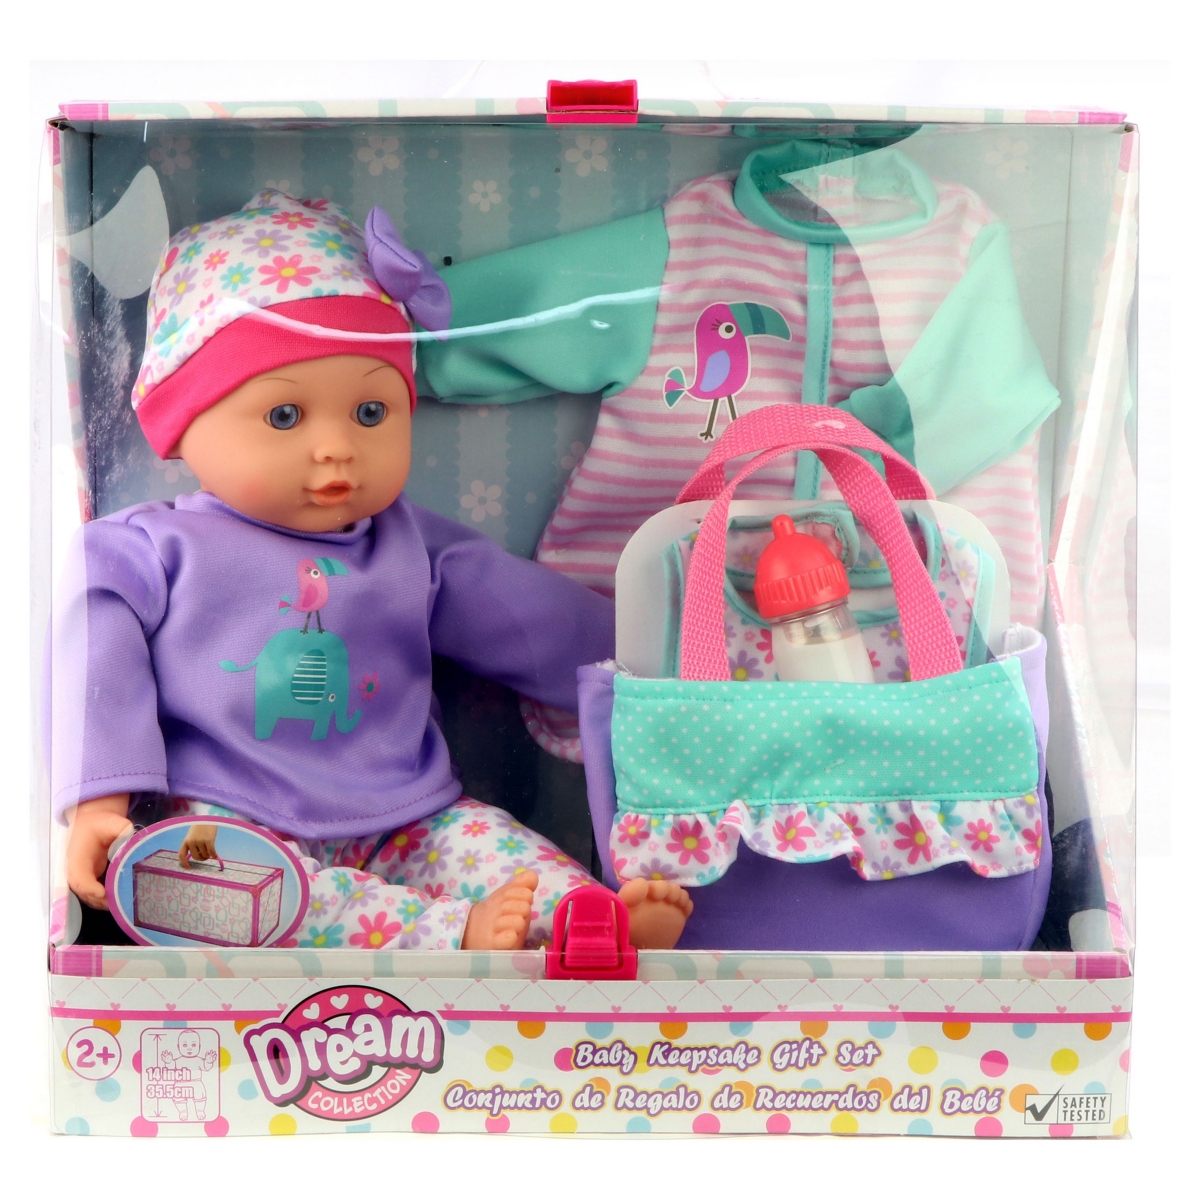 Redbox Dream Collection 14 Inch Baby Doll Gift Set With Accessories In Multi